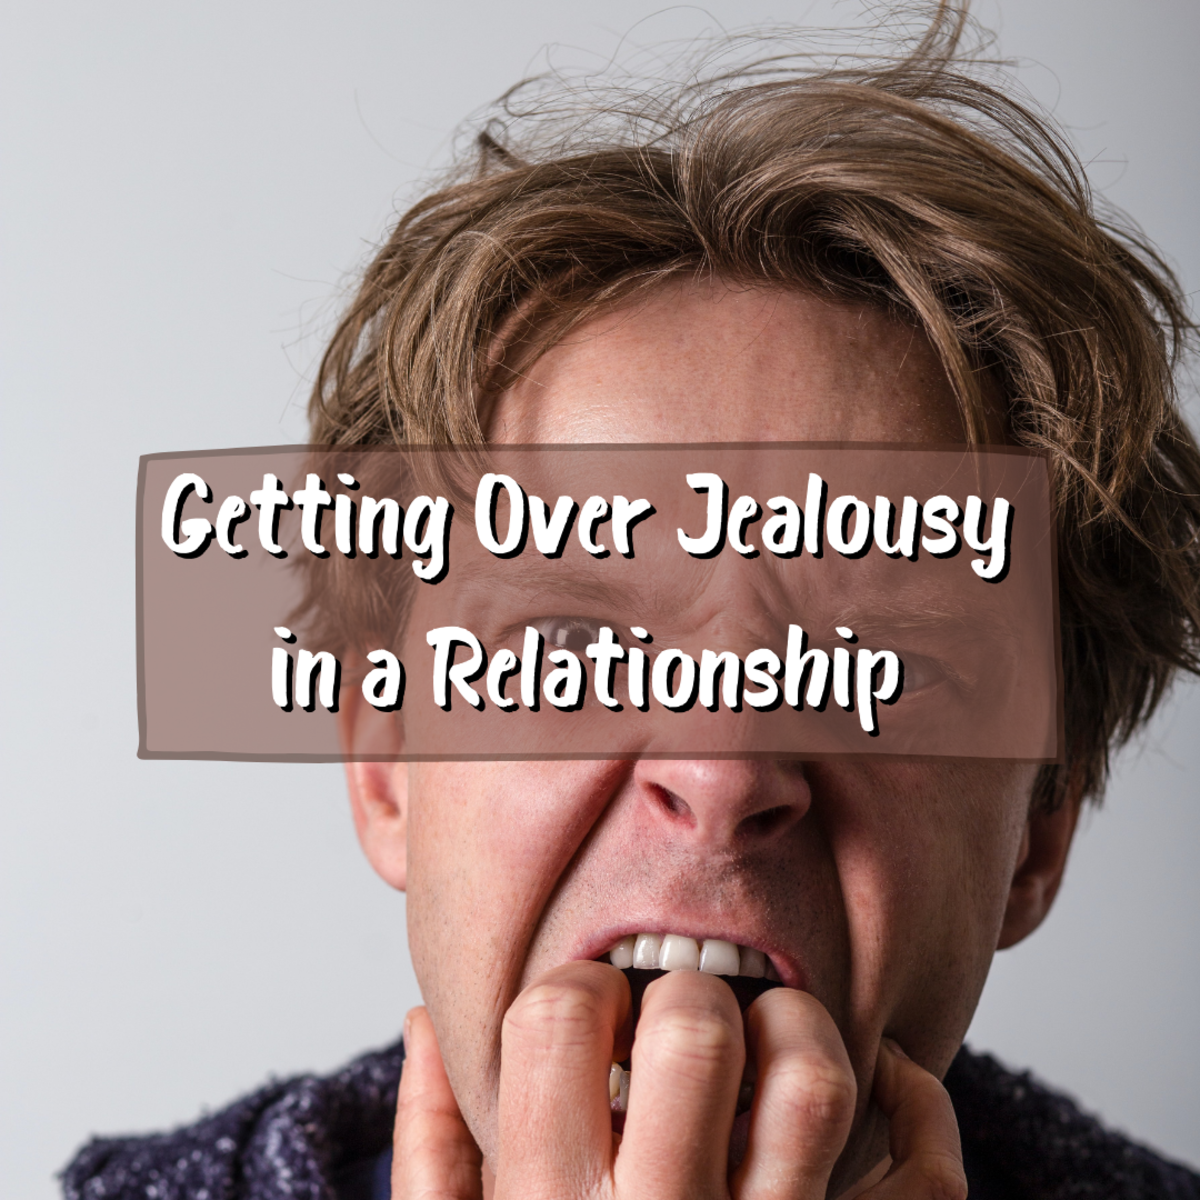 How to Get Over Jealousy in a Relationship and Stop Obsessing